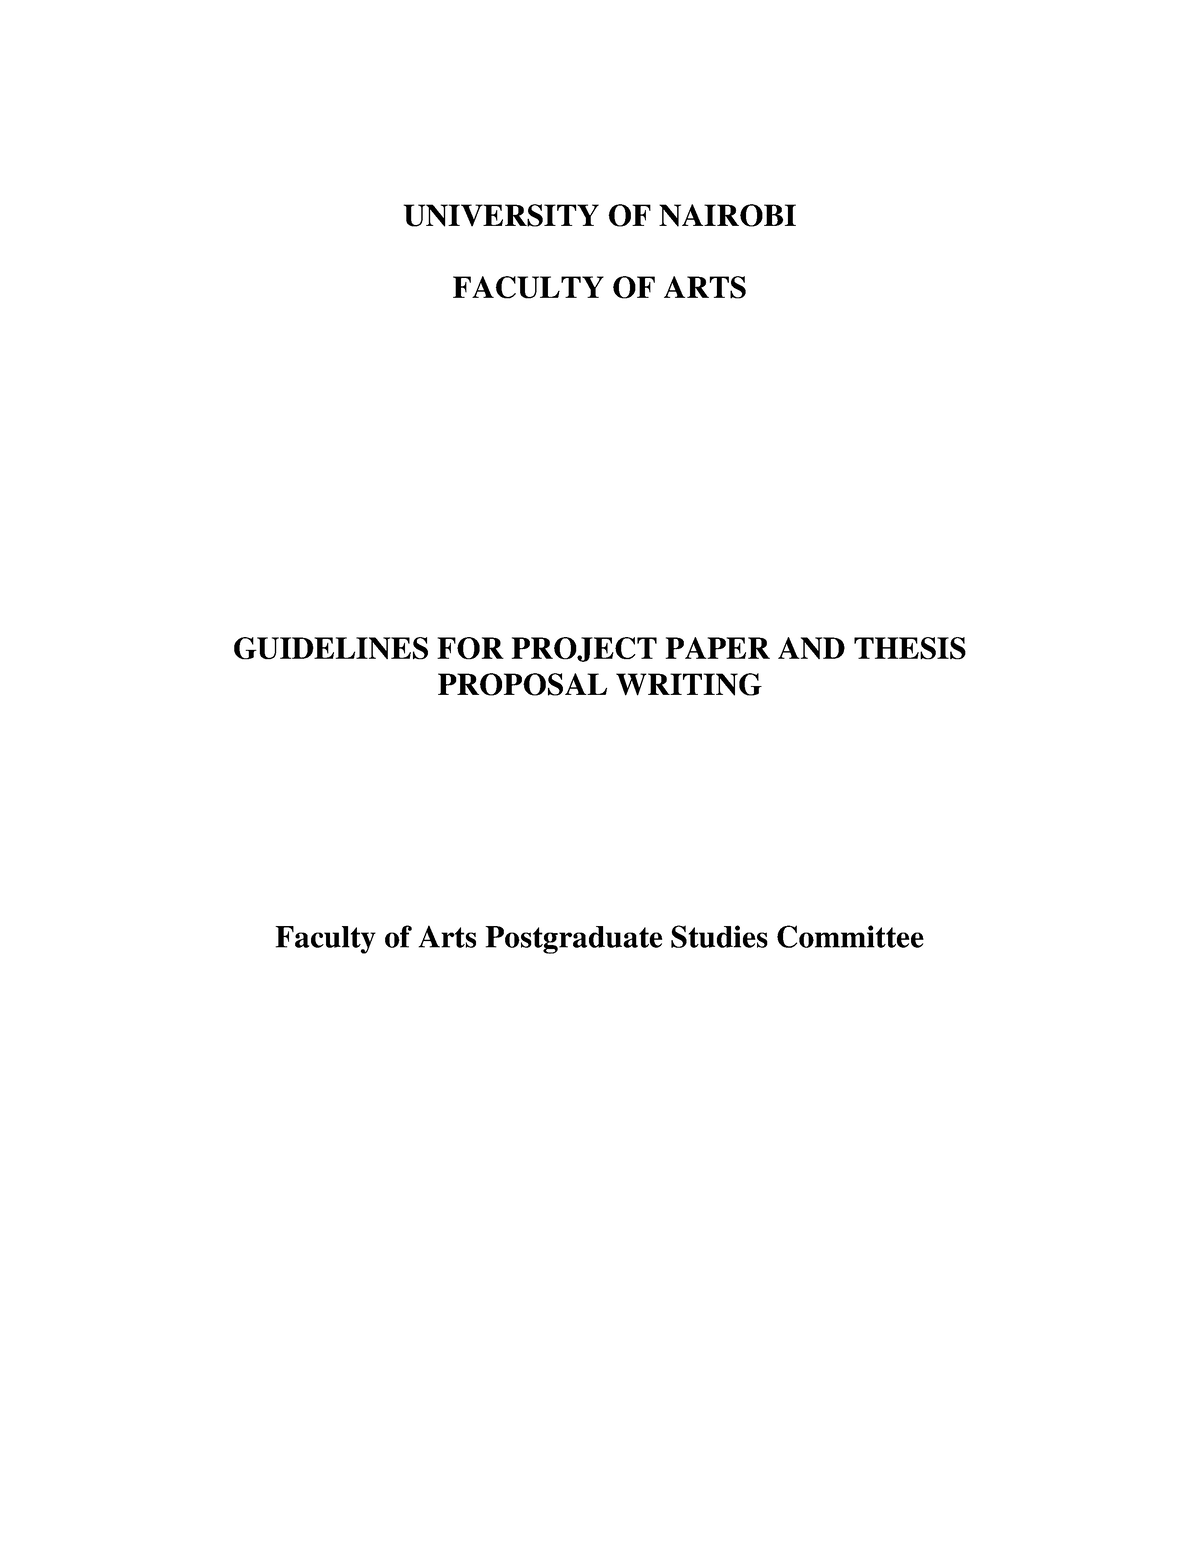 university of nairobi research proposal guidelines